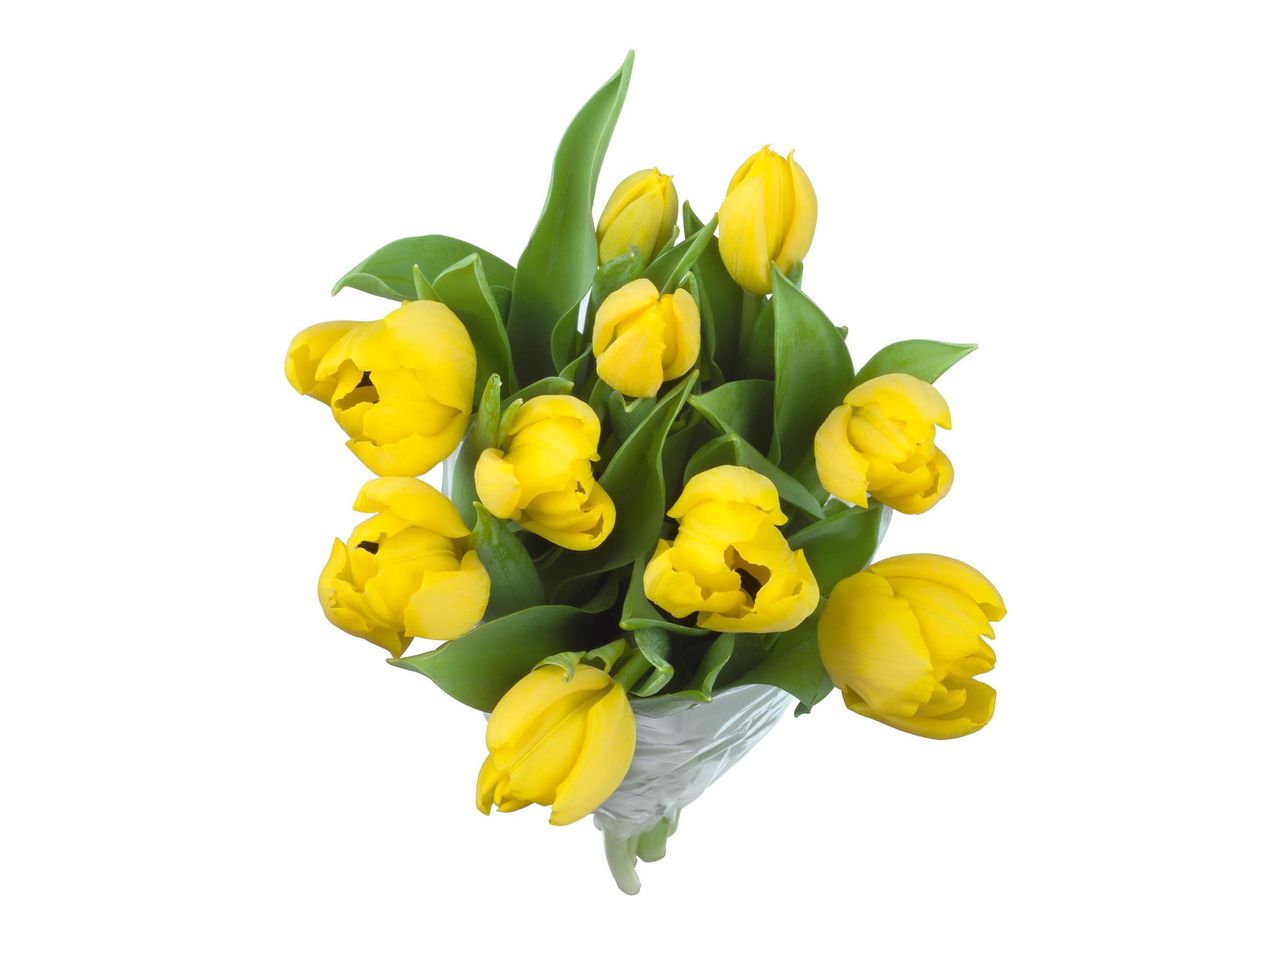 Go to full screen view: Tulips - Image 1